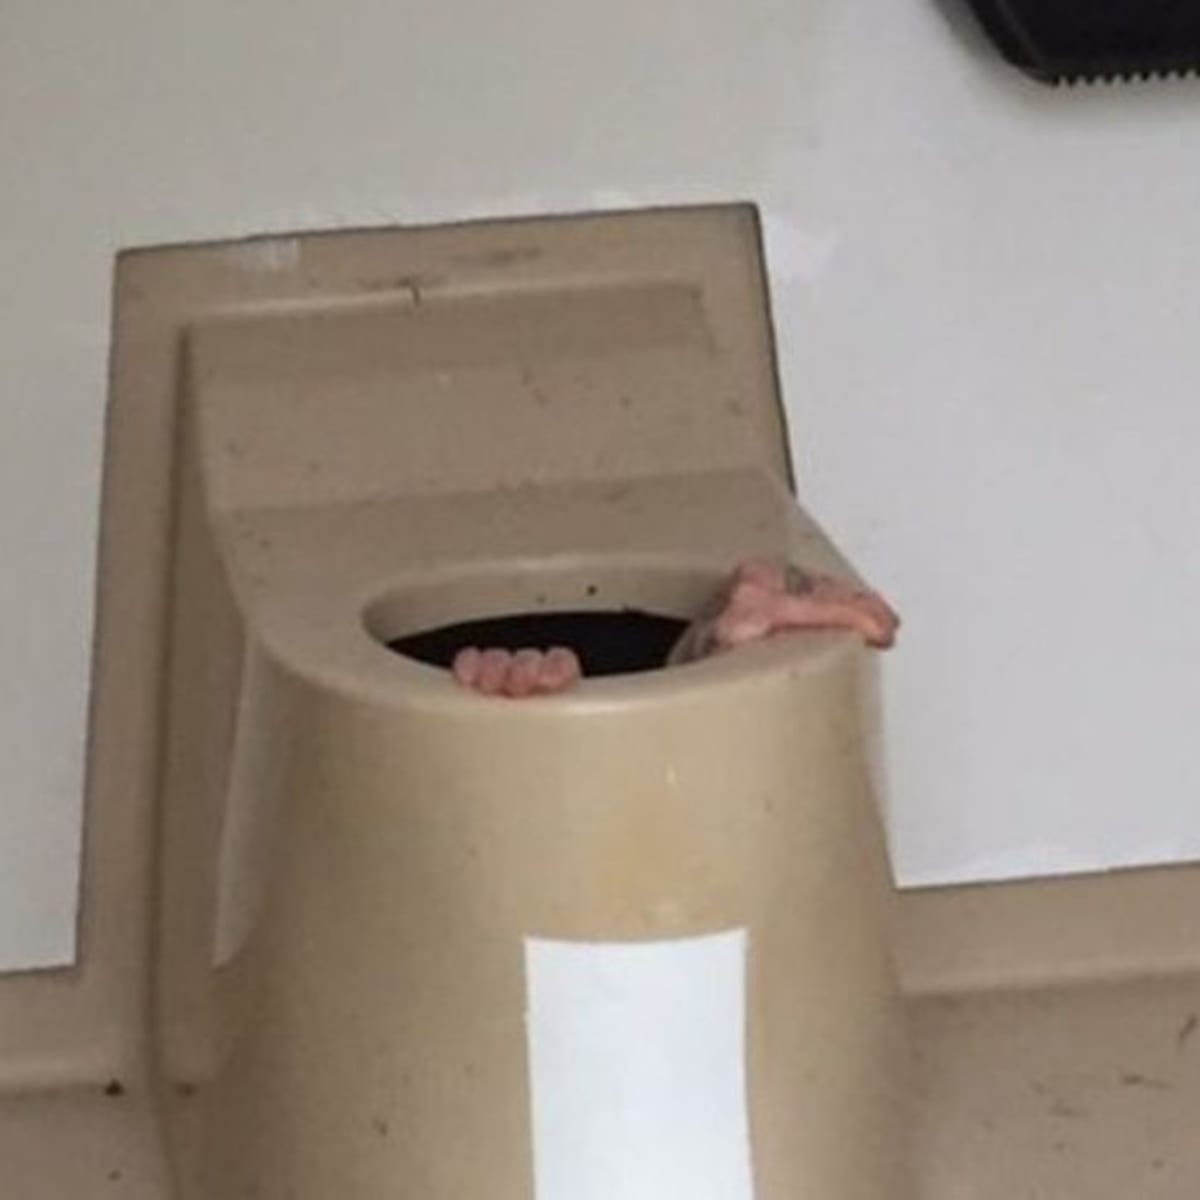 Mortified mum trapped in public toilet unable to get out until